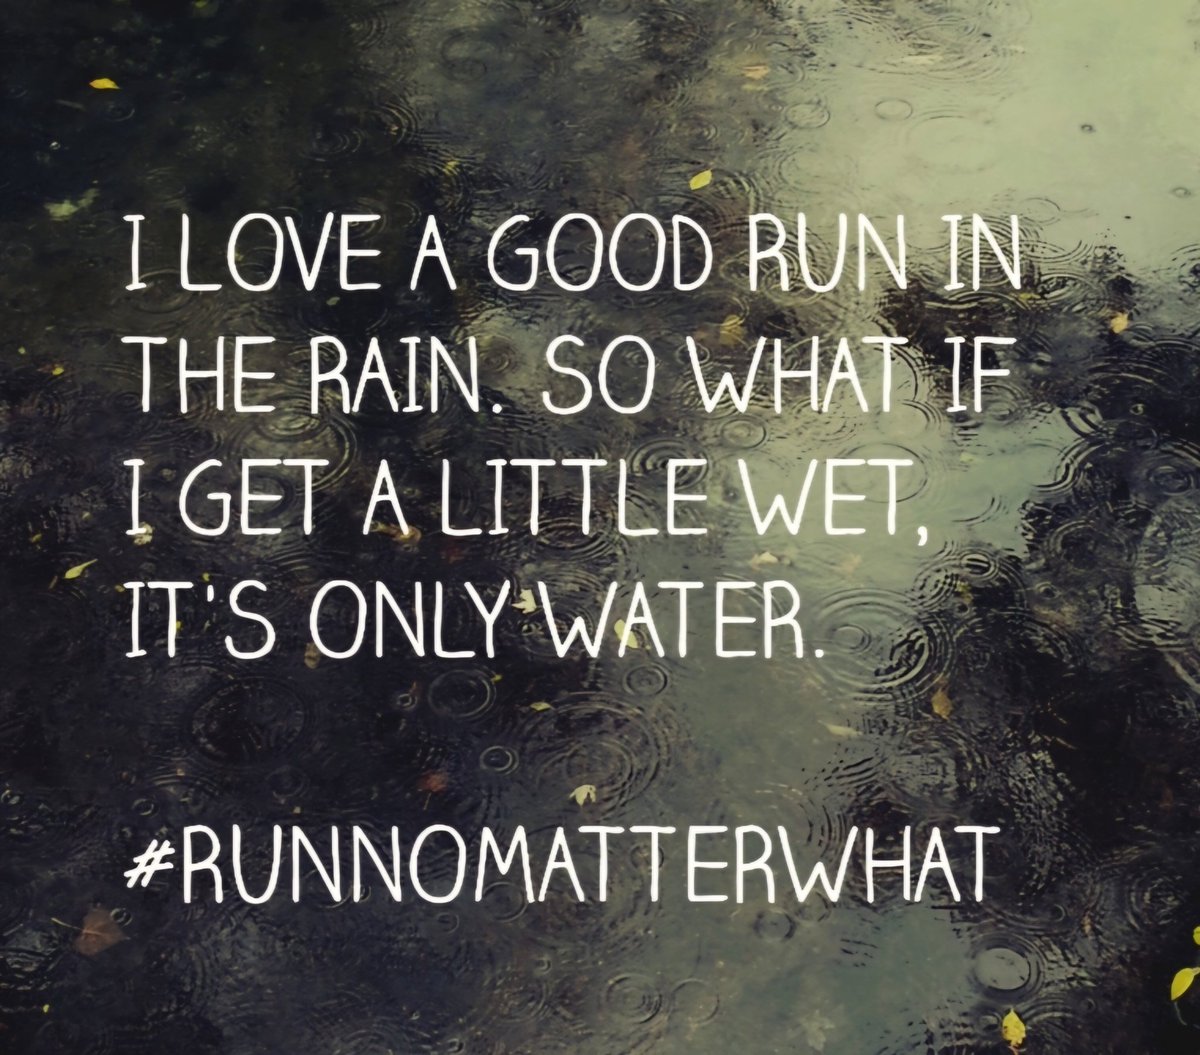 It's been raining here nonstop for two days. Trying to psych myself up to run anyway, because we all know I hate it! 🤣😝 Who's racing or training thus weekend? Good luck! Happy Saturday! 🎉
#runningintherain #weekendmotivation #SaturdayVibes